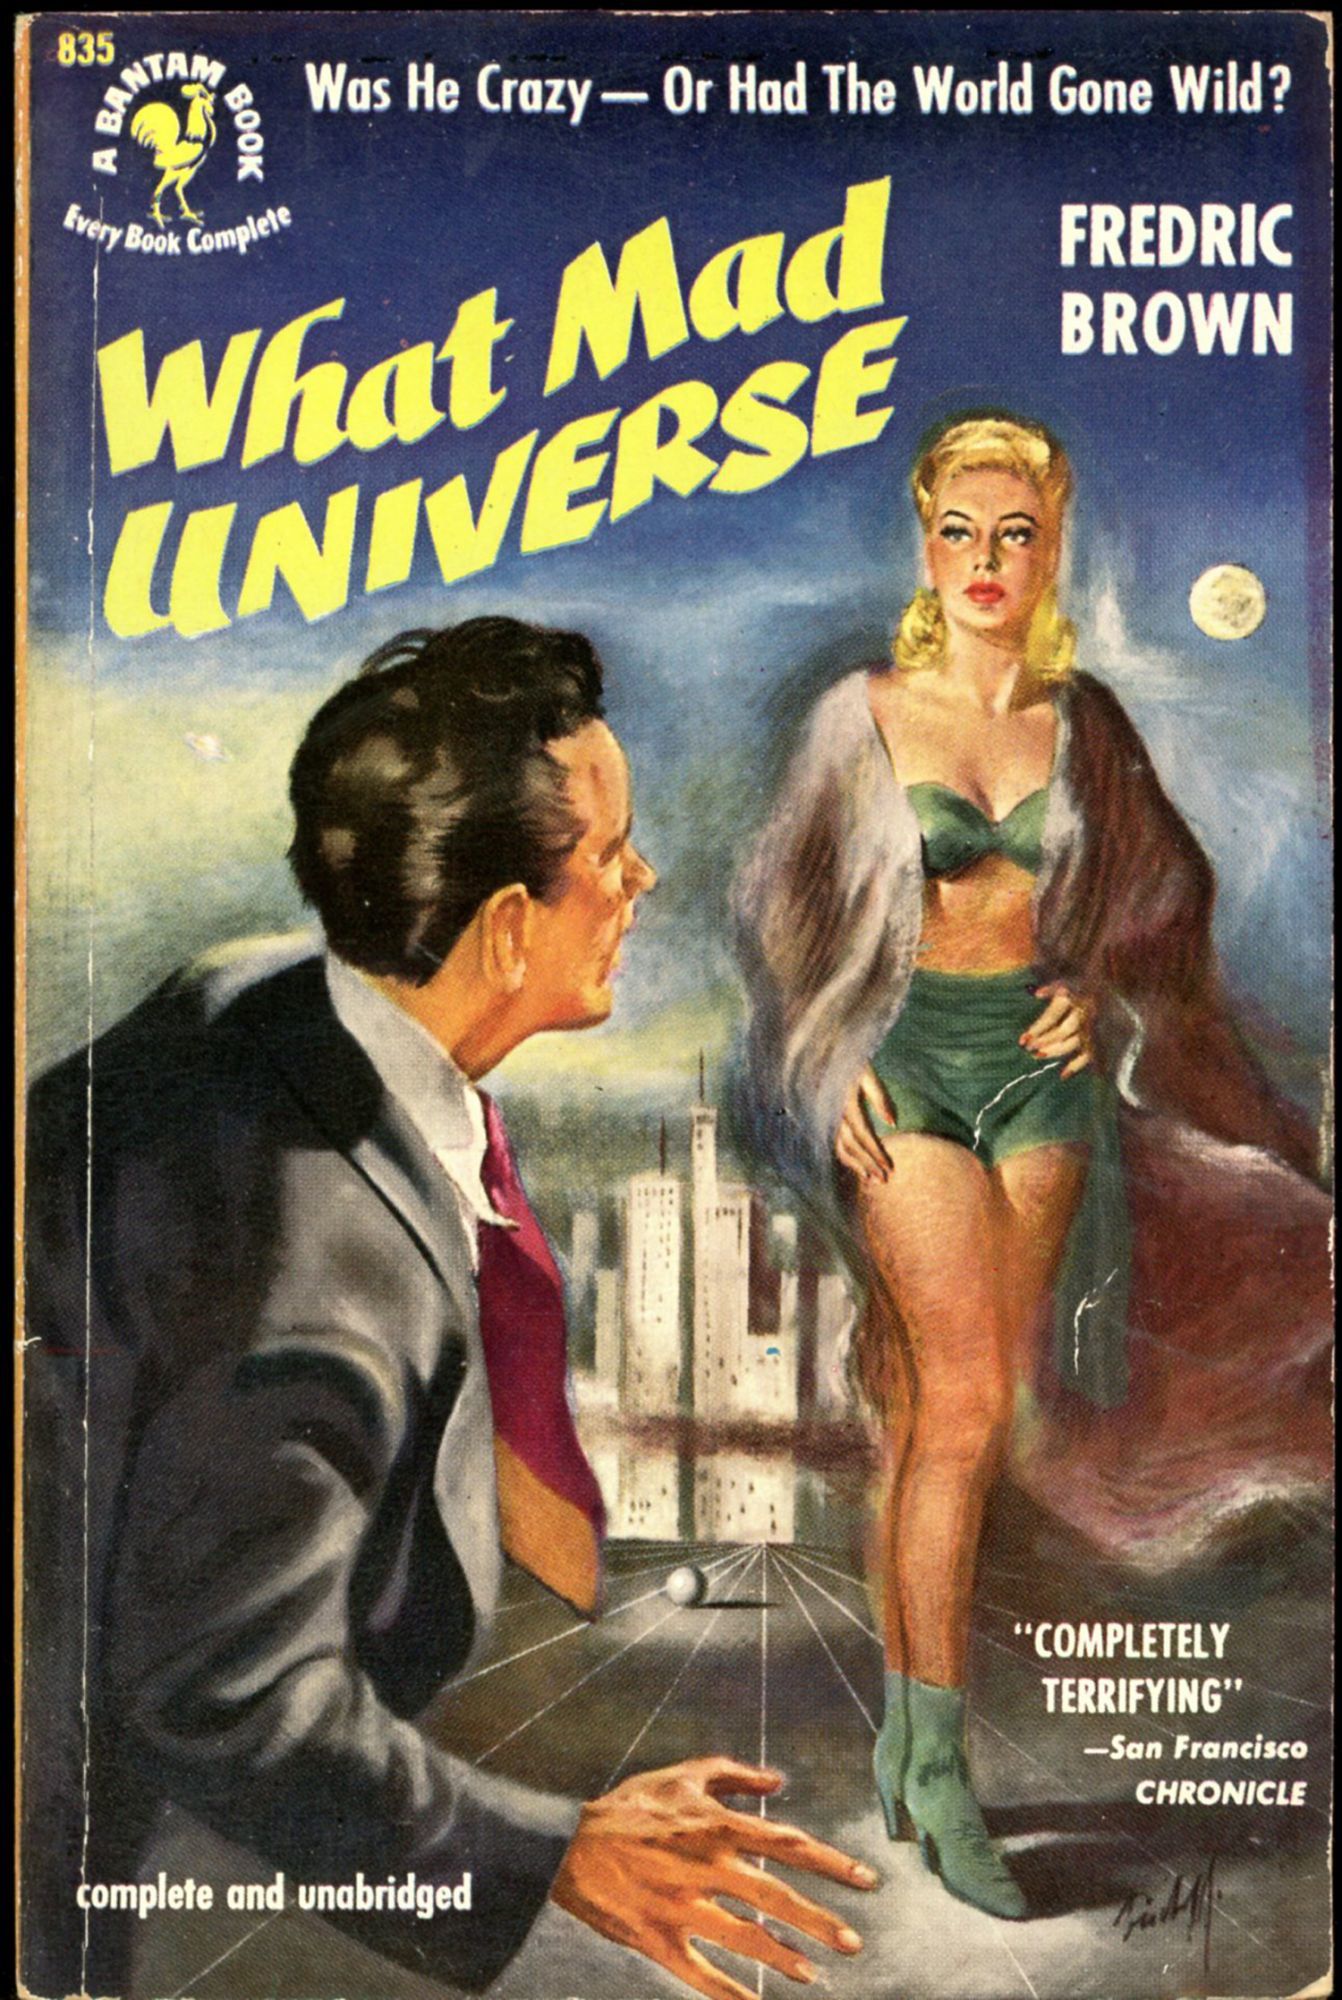 What Mad Universe, Fredric Brown